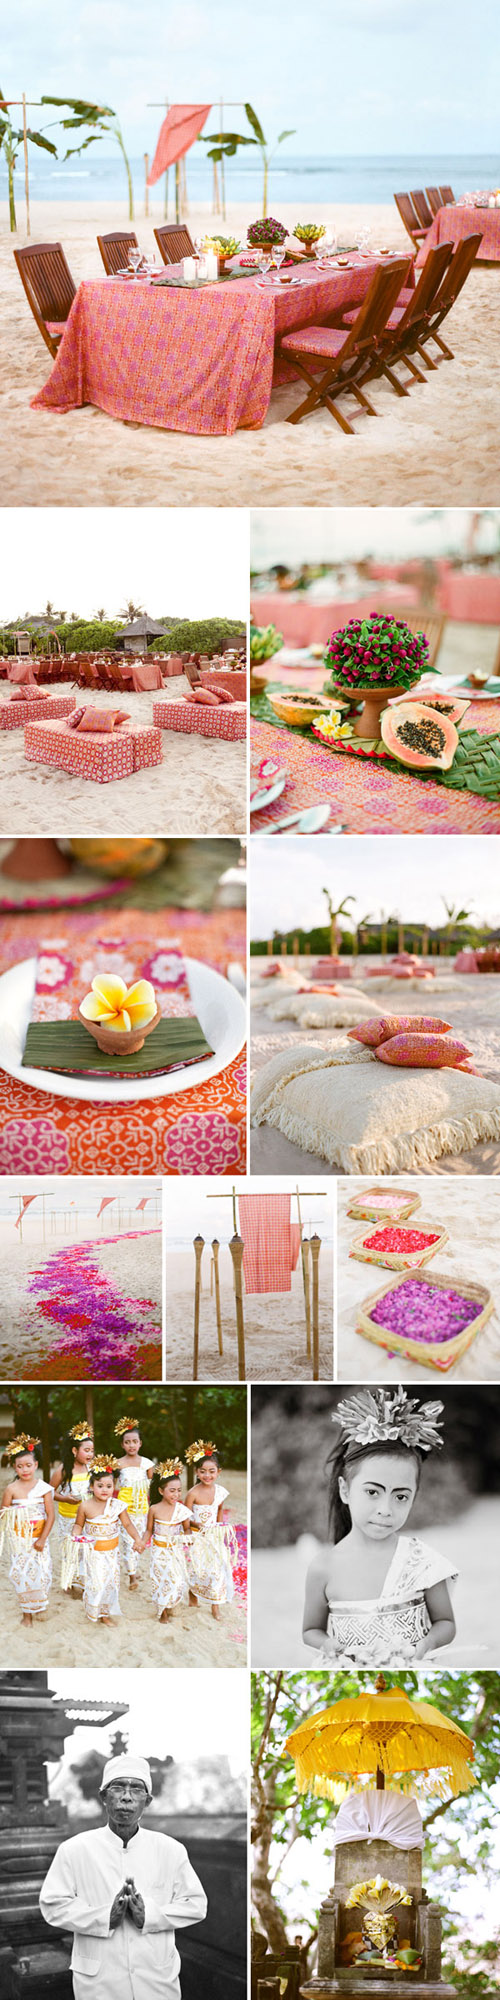 bright colorful destination wedding from Lisa Vorce of Oh How Charming! photographed by Aaron Delesie